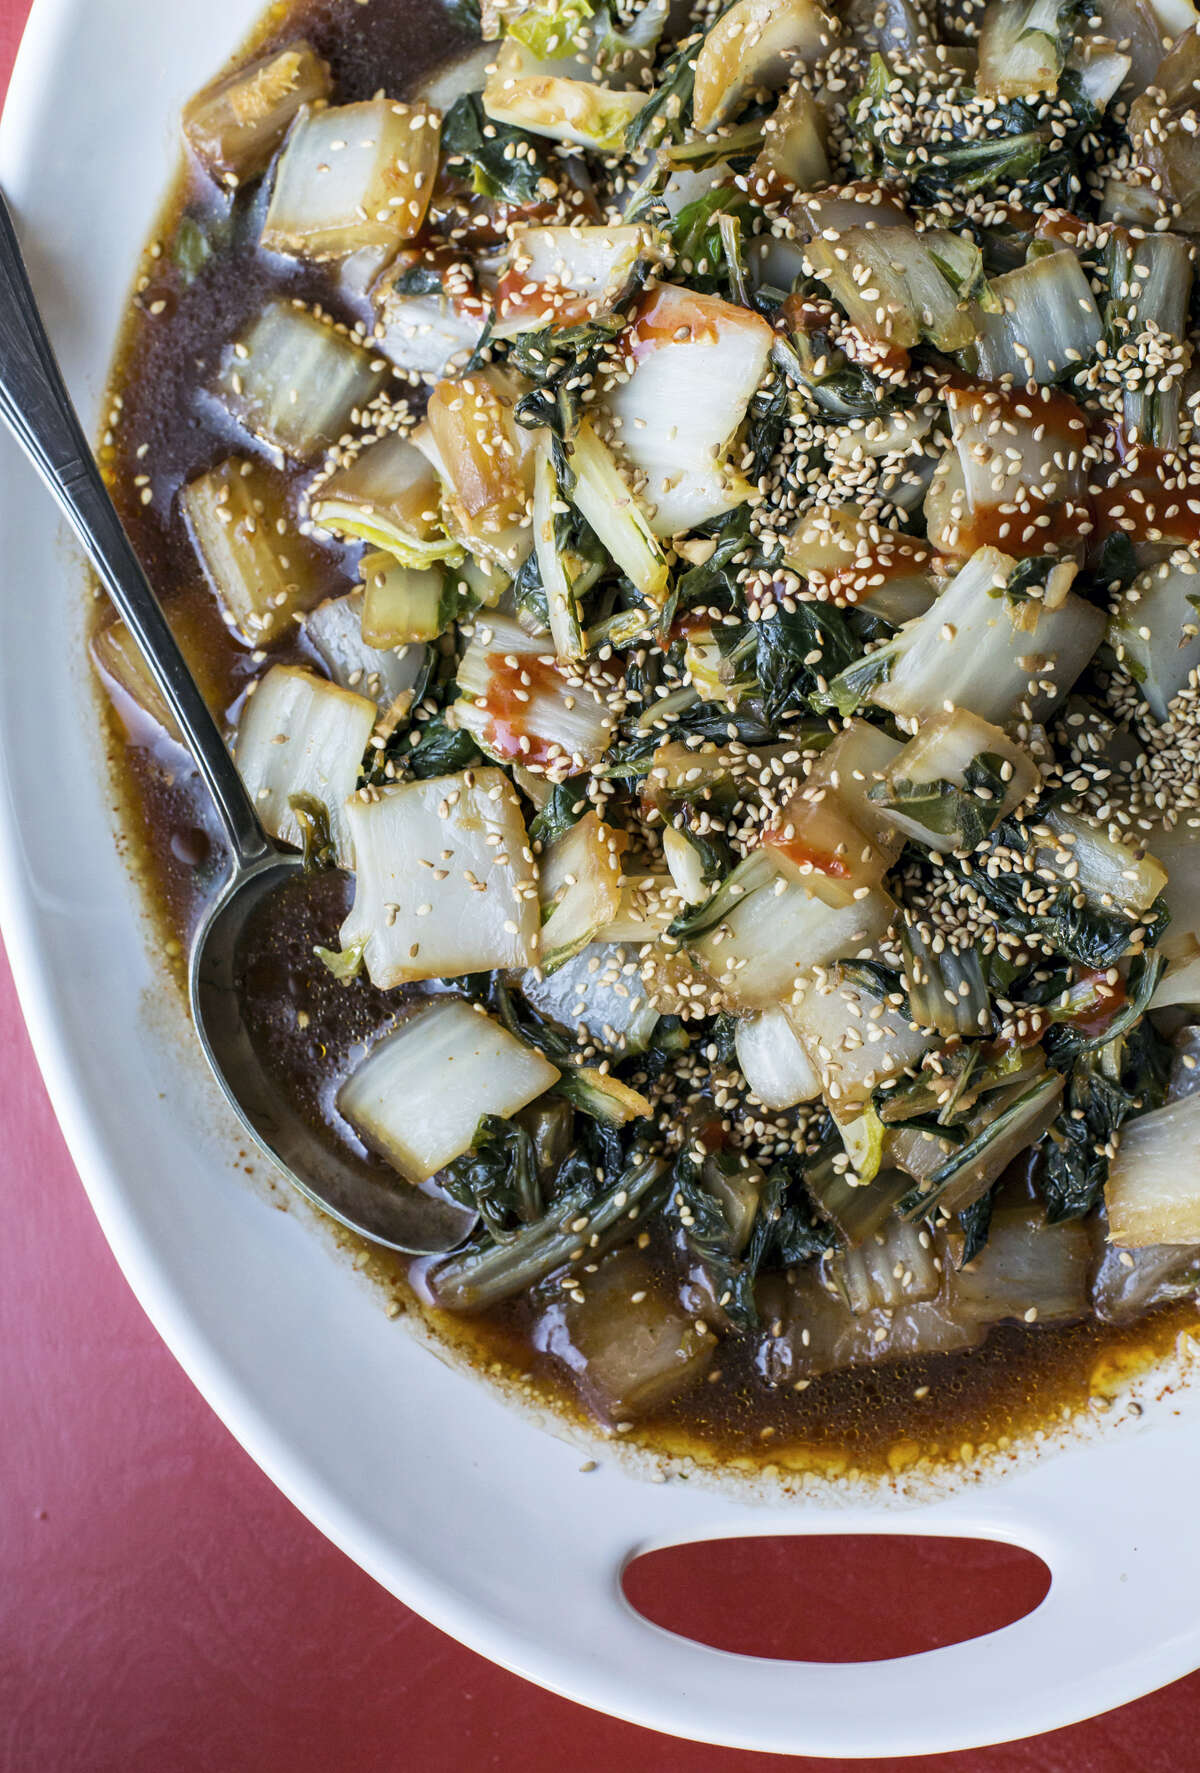 Asian bok choy is a simple yet solid side dish.